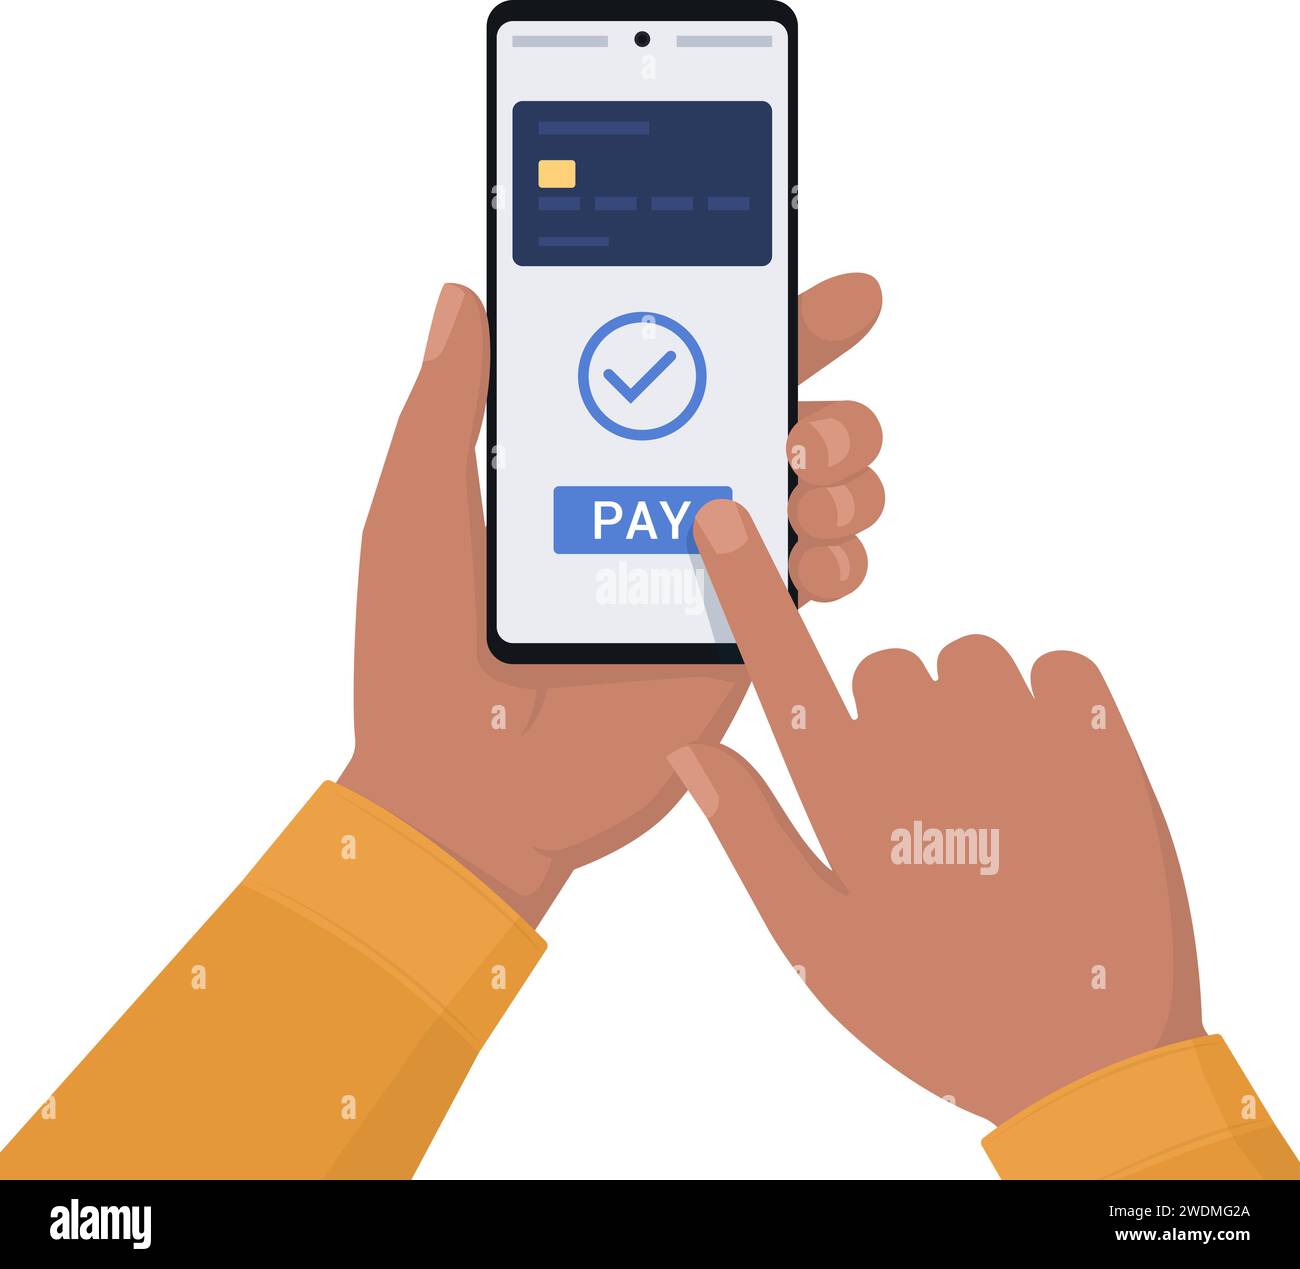 User paying using his digital wallet on smartphone Stock Vector